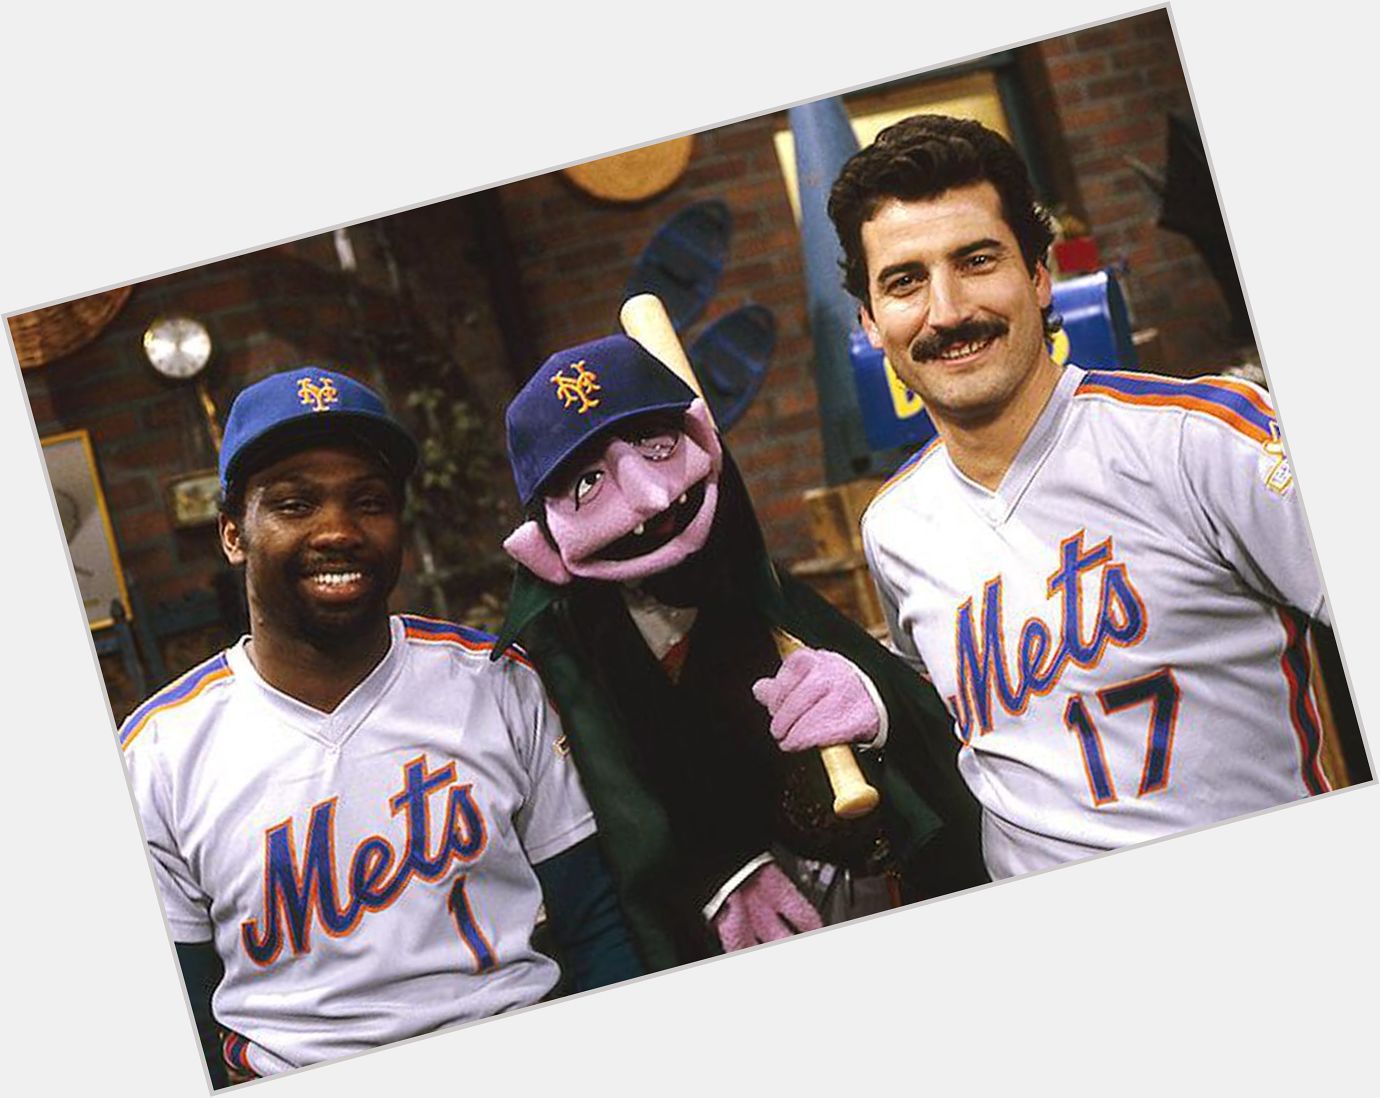 Happy Birthday to Mookie Wilson(far left) who turns 62 today! 